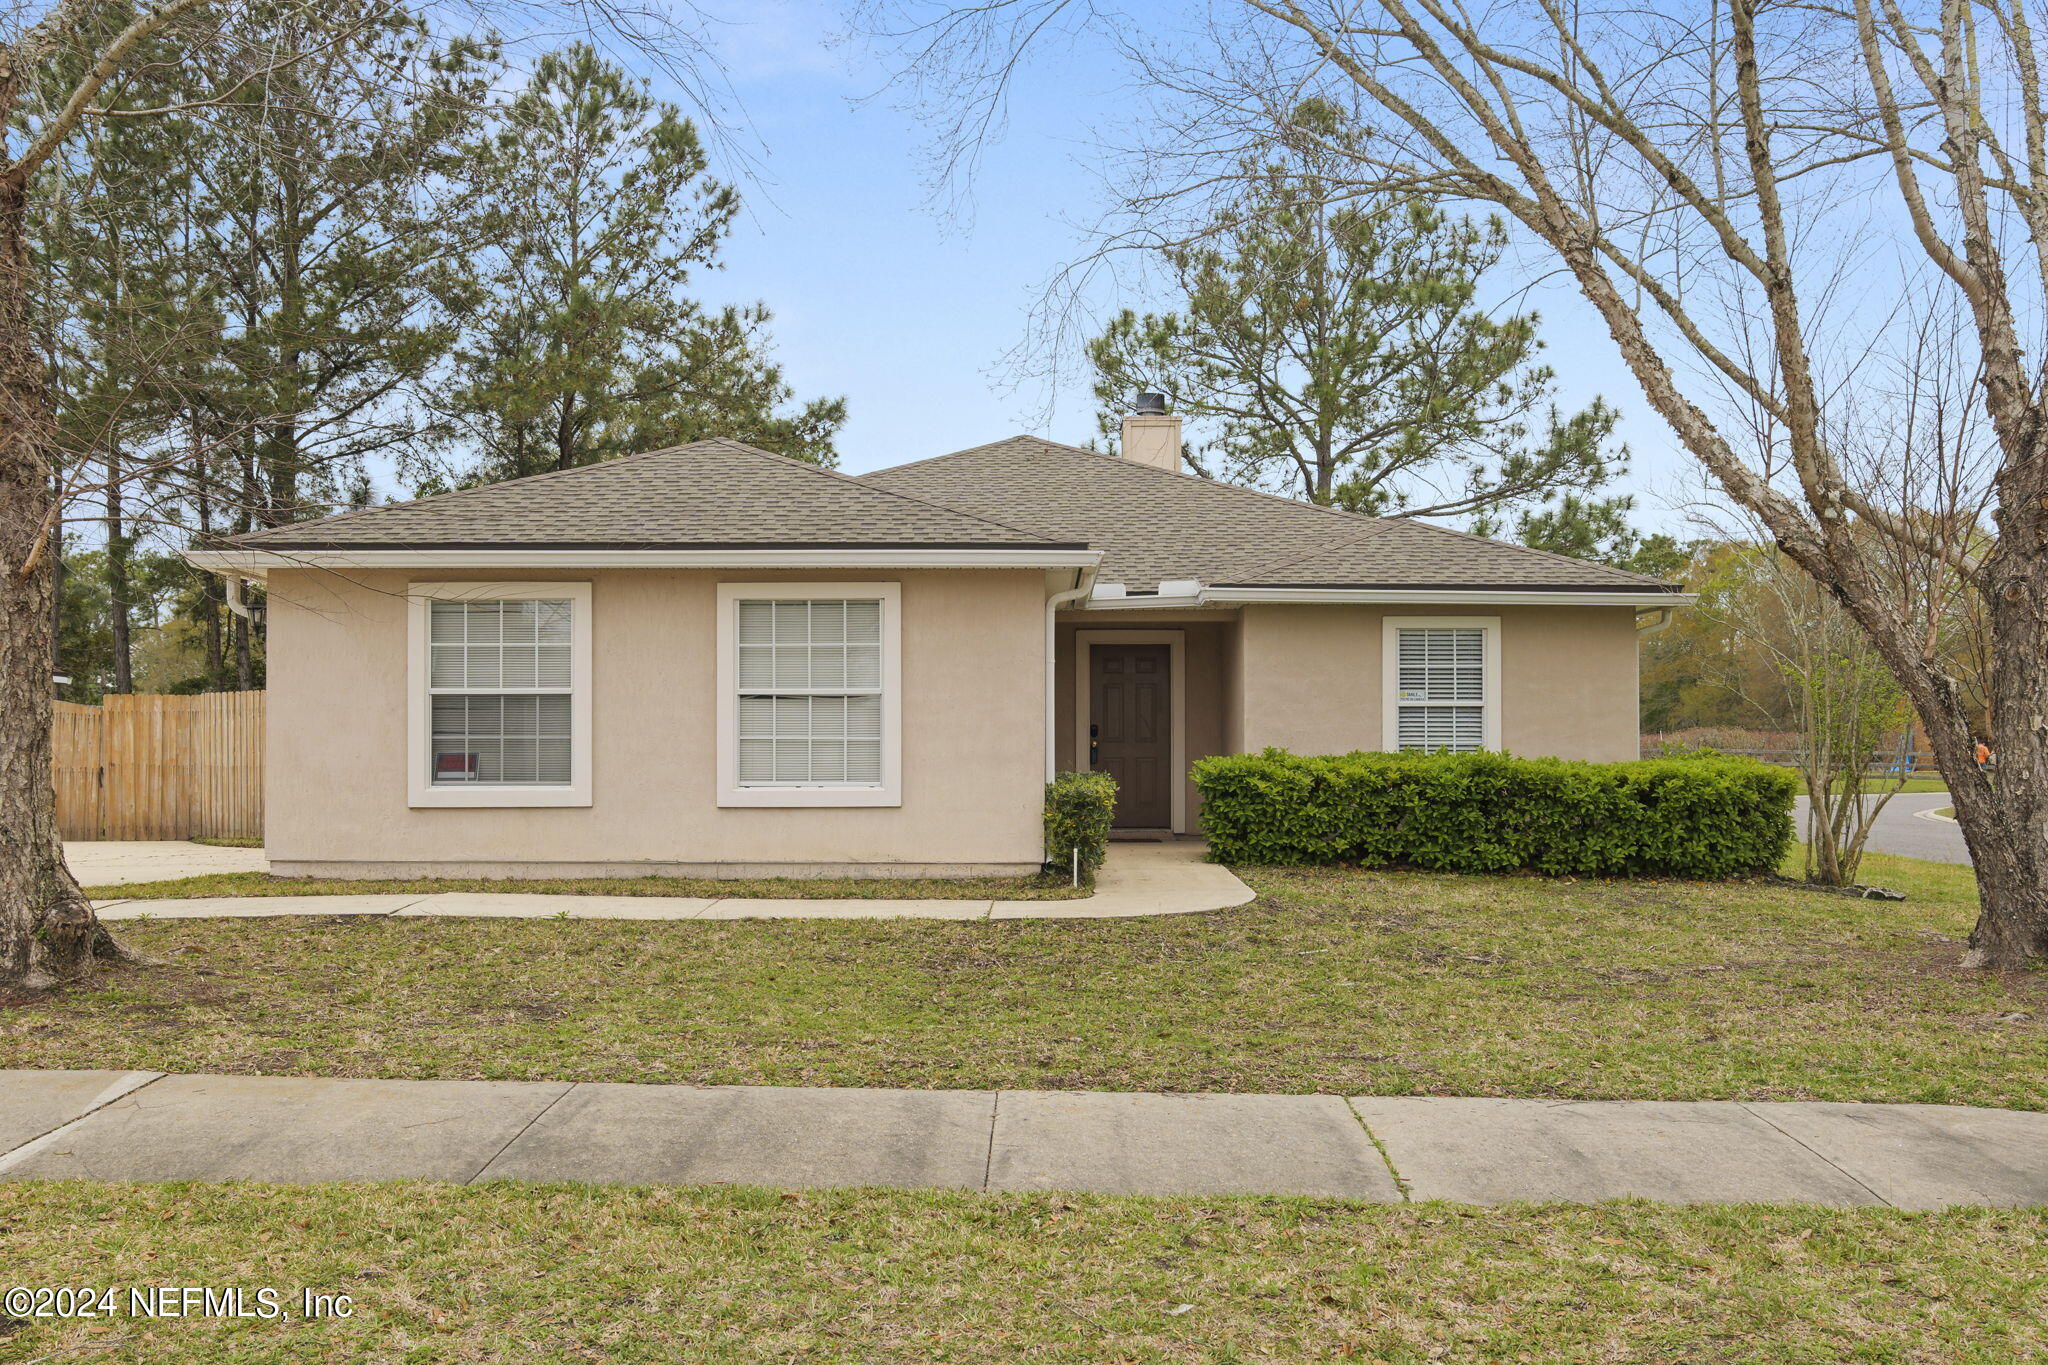 Jacksonville, FL home for sale located at 2602 SPRINGWILLOW Drive, Jacksonville, FL 32221